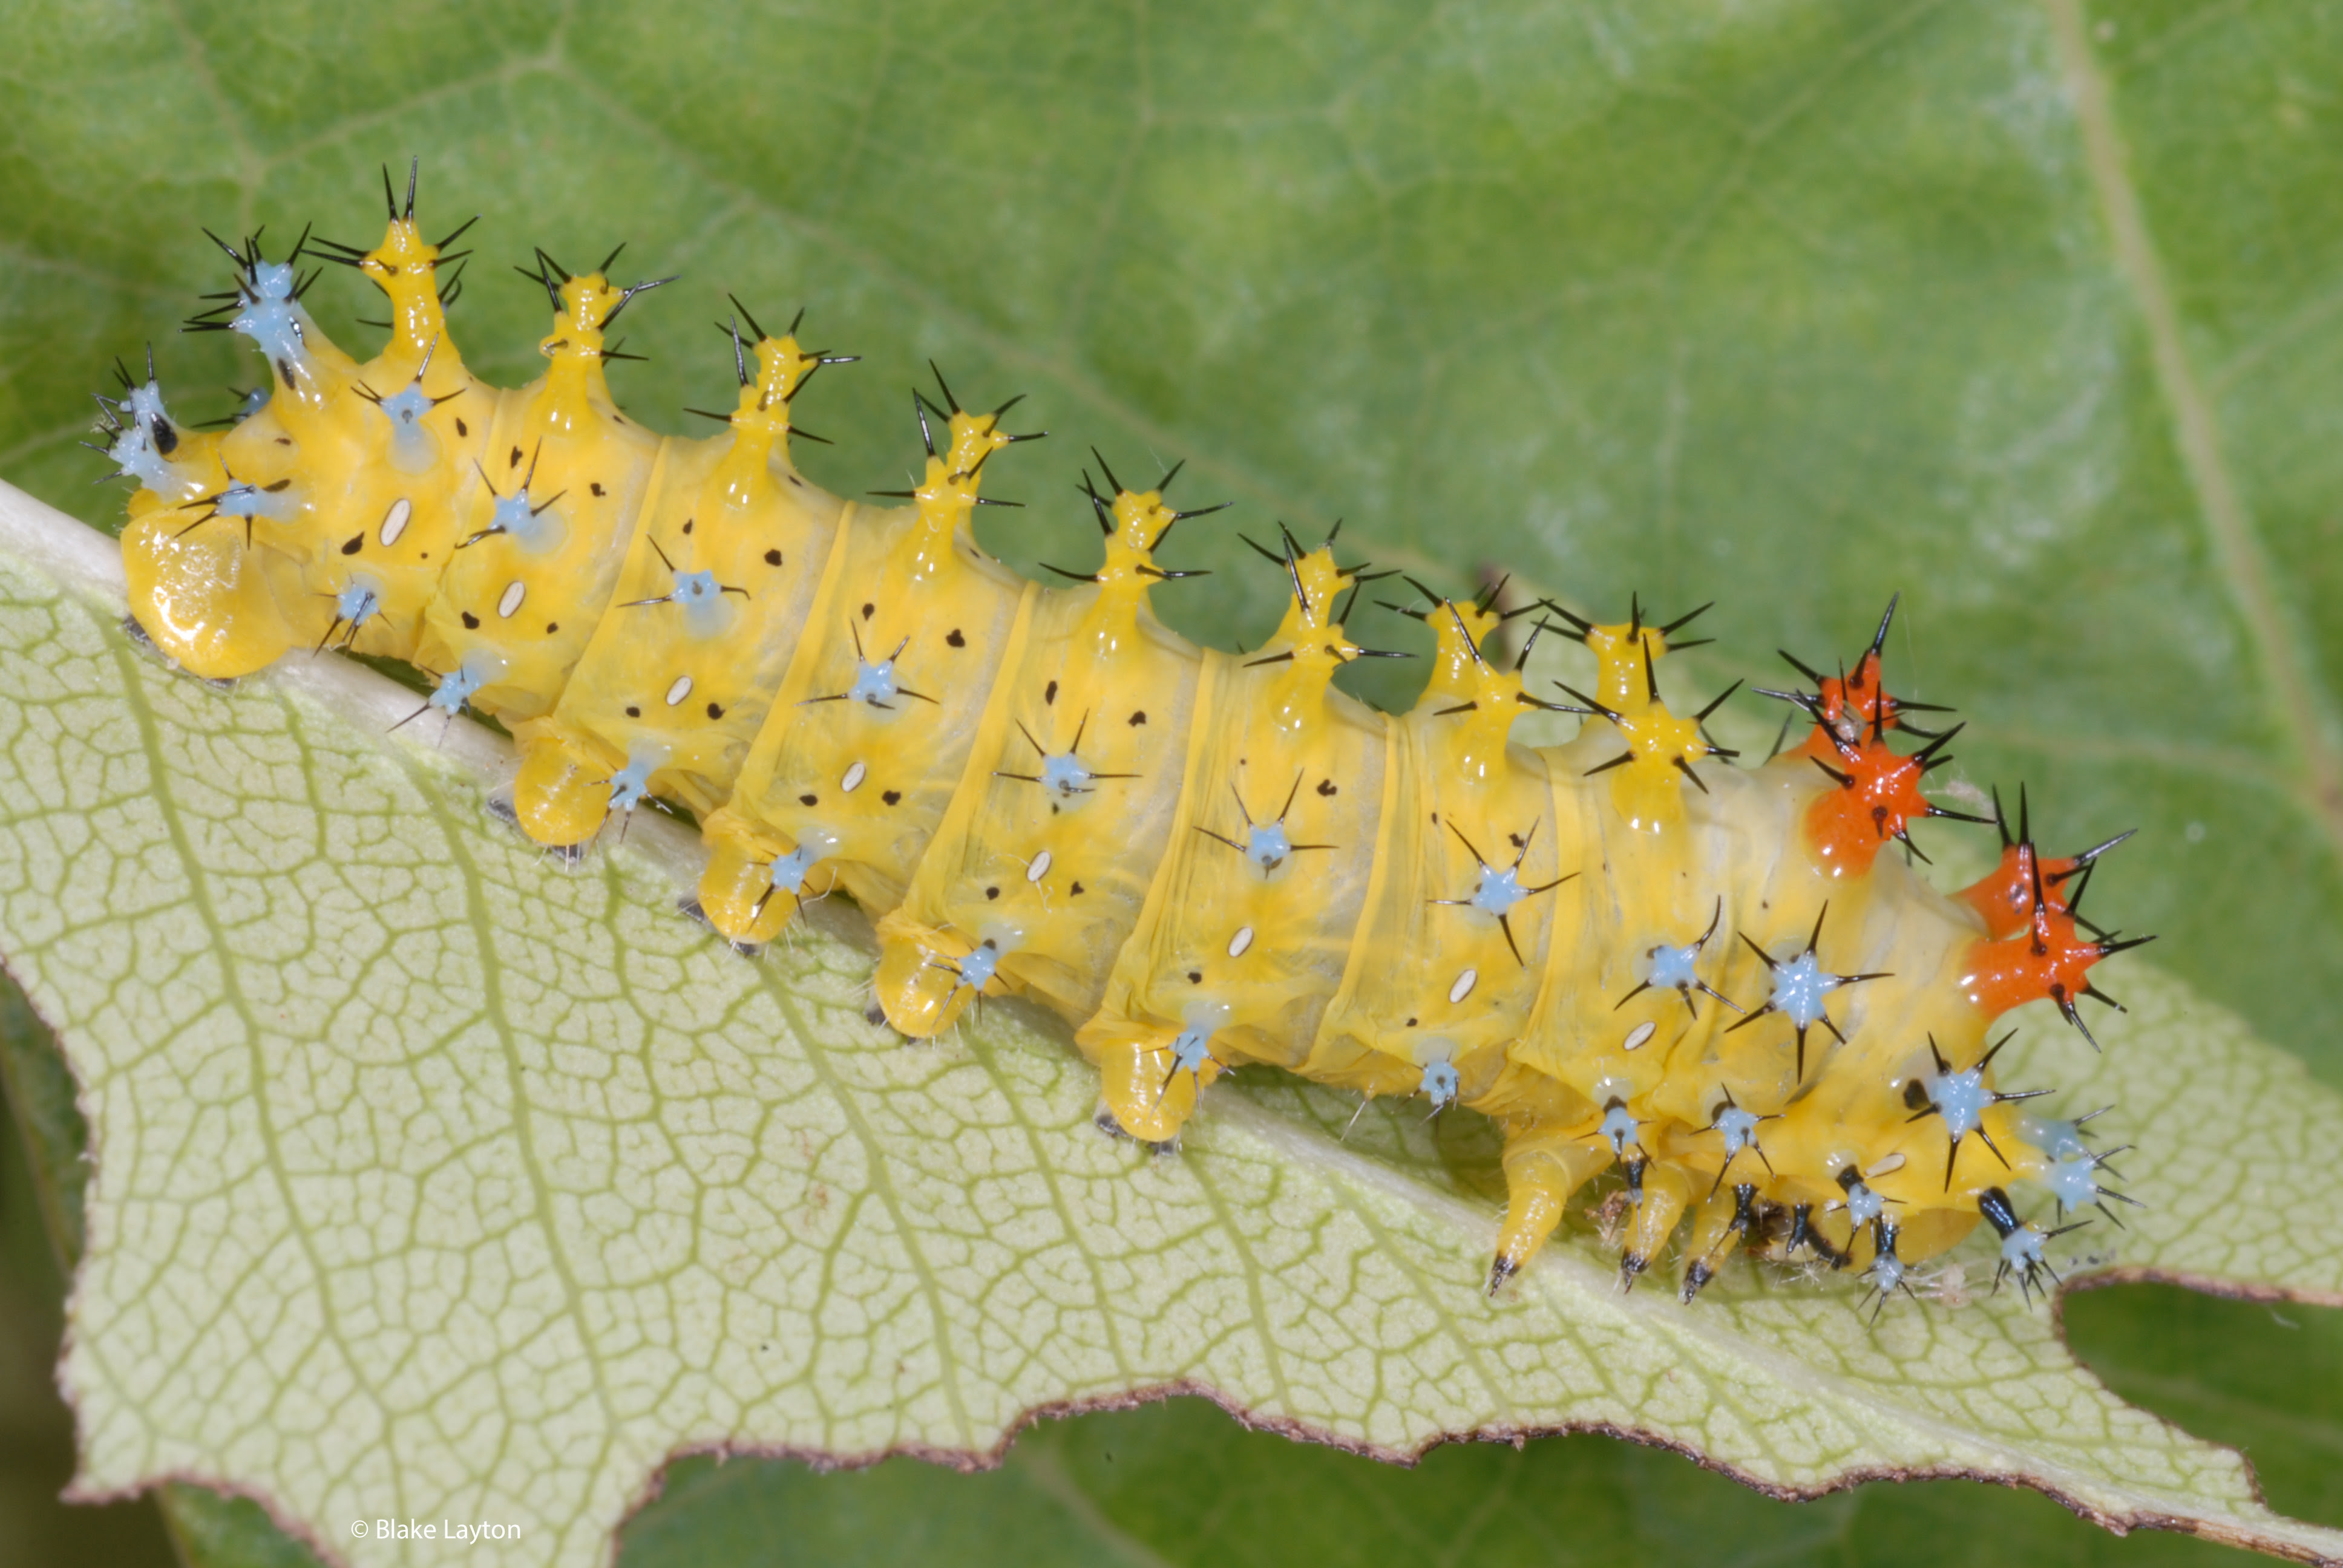 Light yellow caterpillar with light blue and orange areas covered in black spikes.